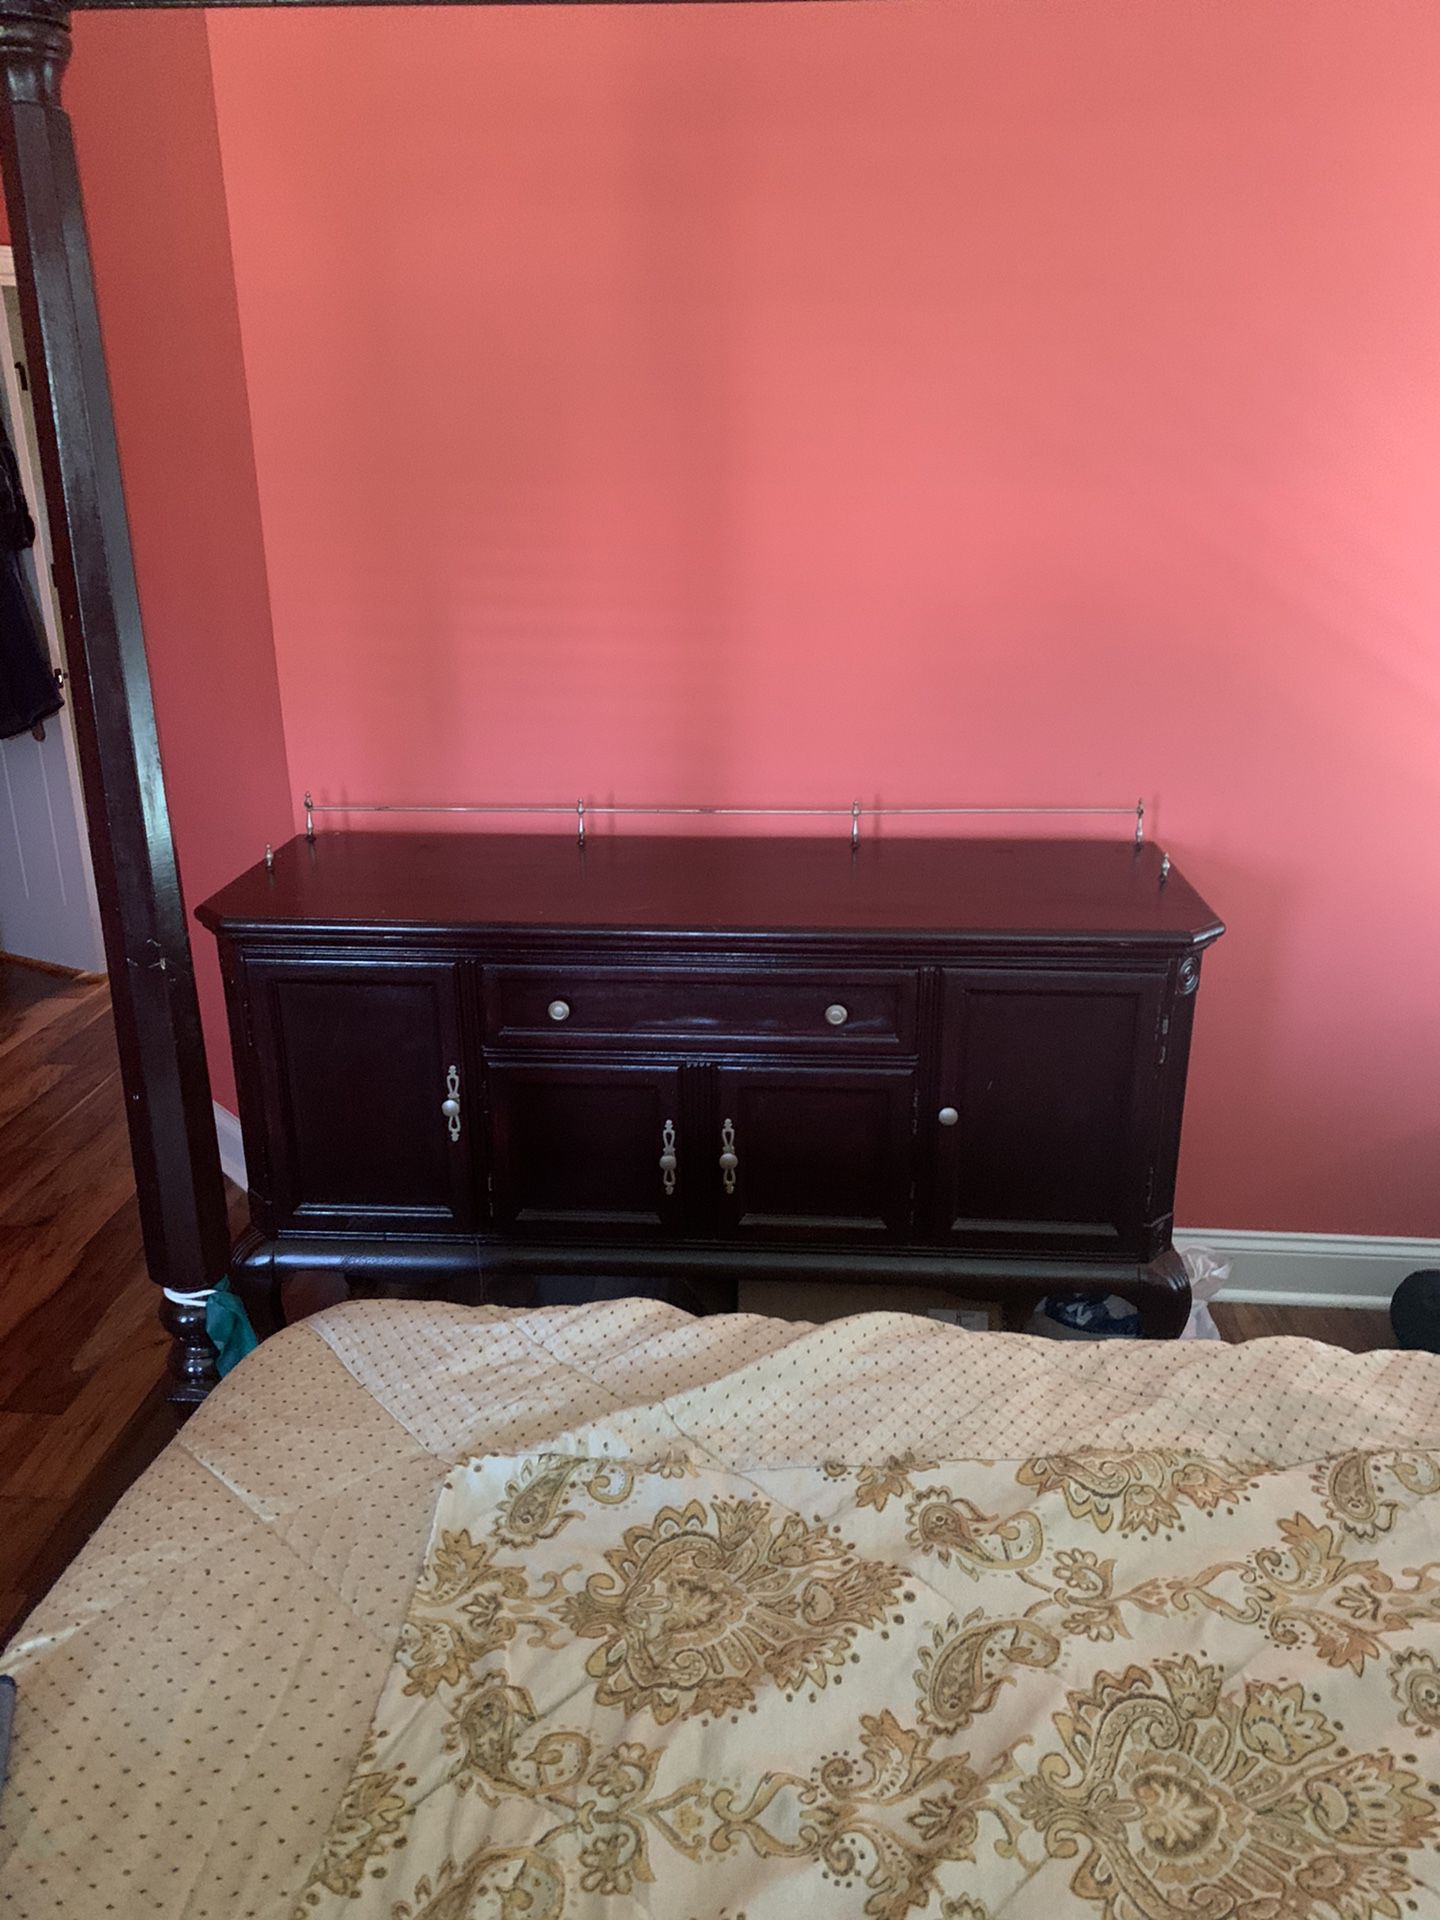 King bed and dresser